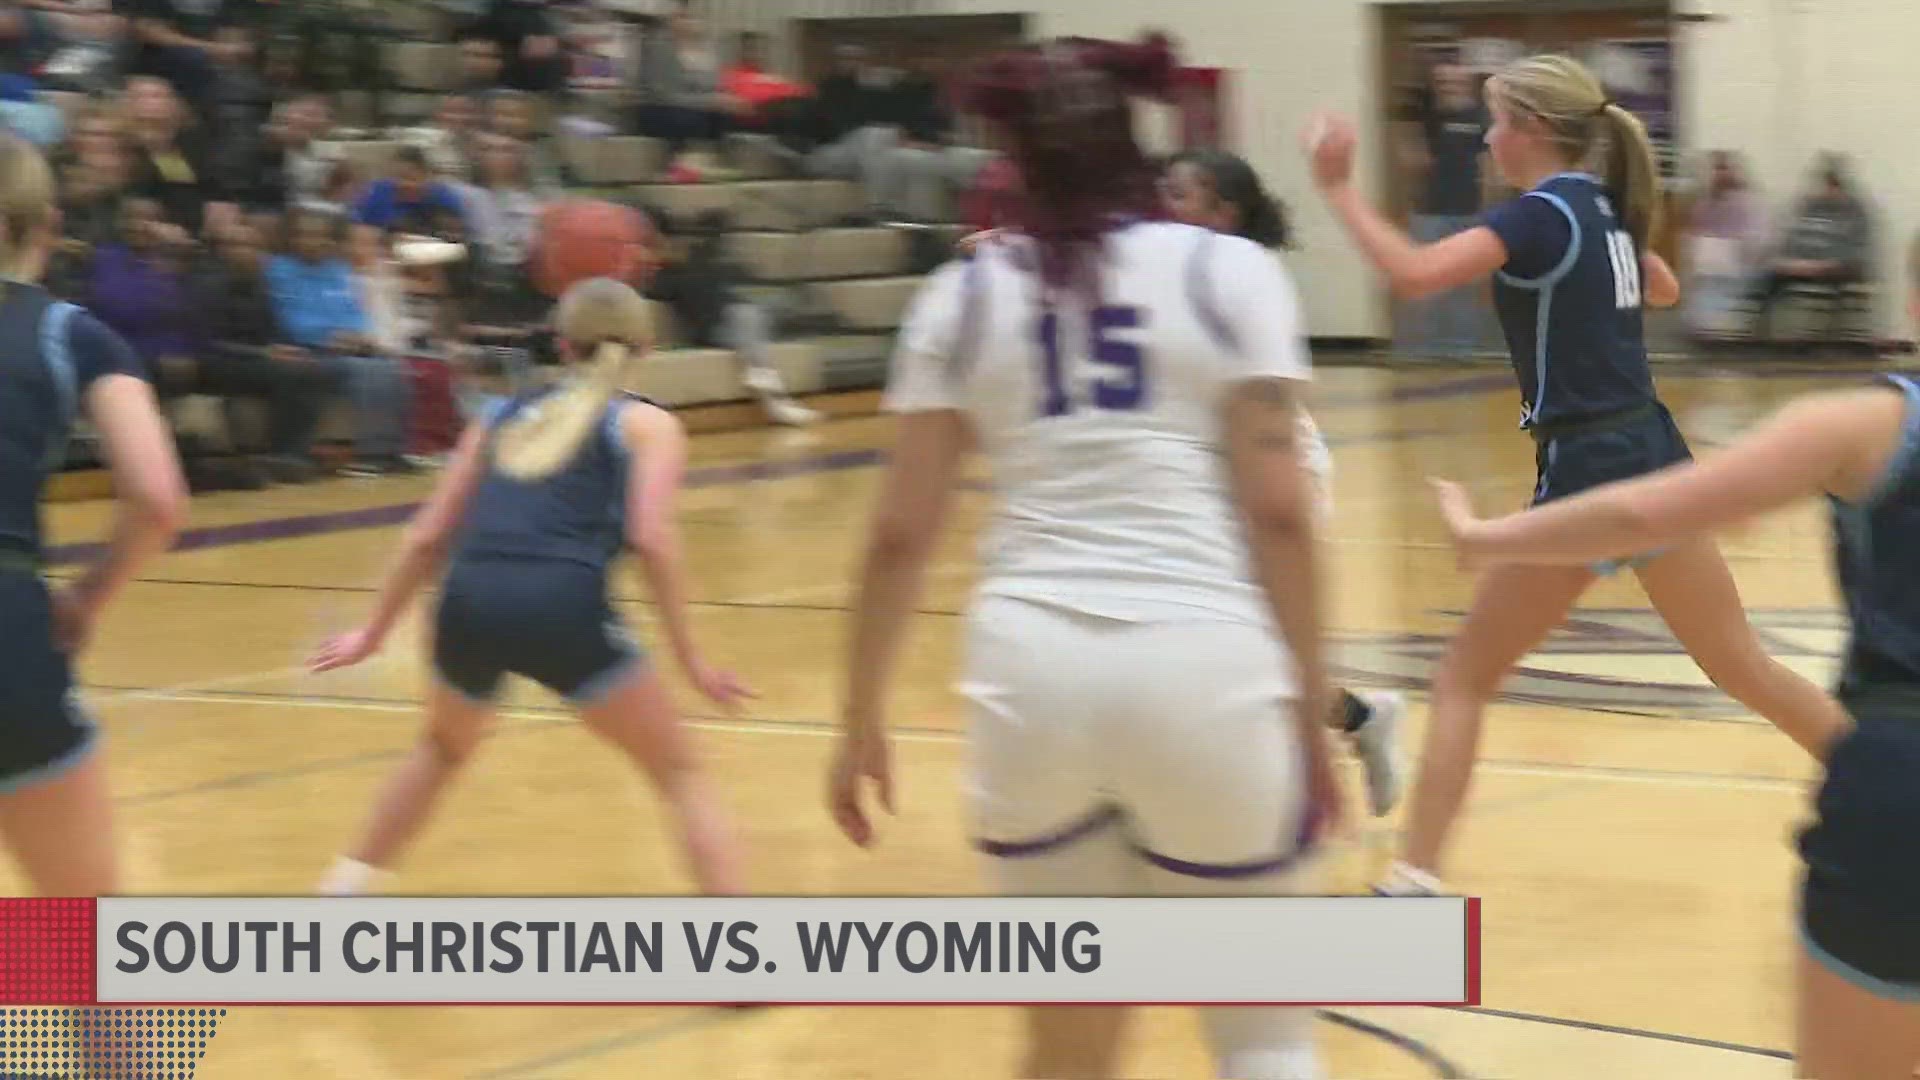 South Christian defeats Wyoming in final seconds 56-55.